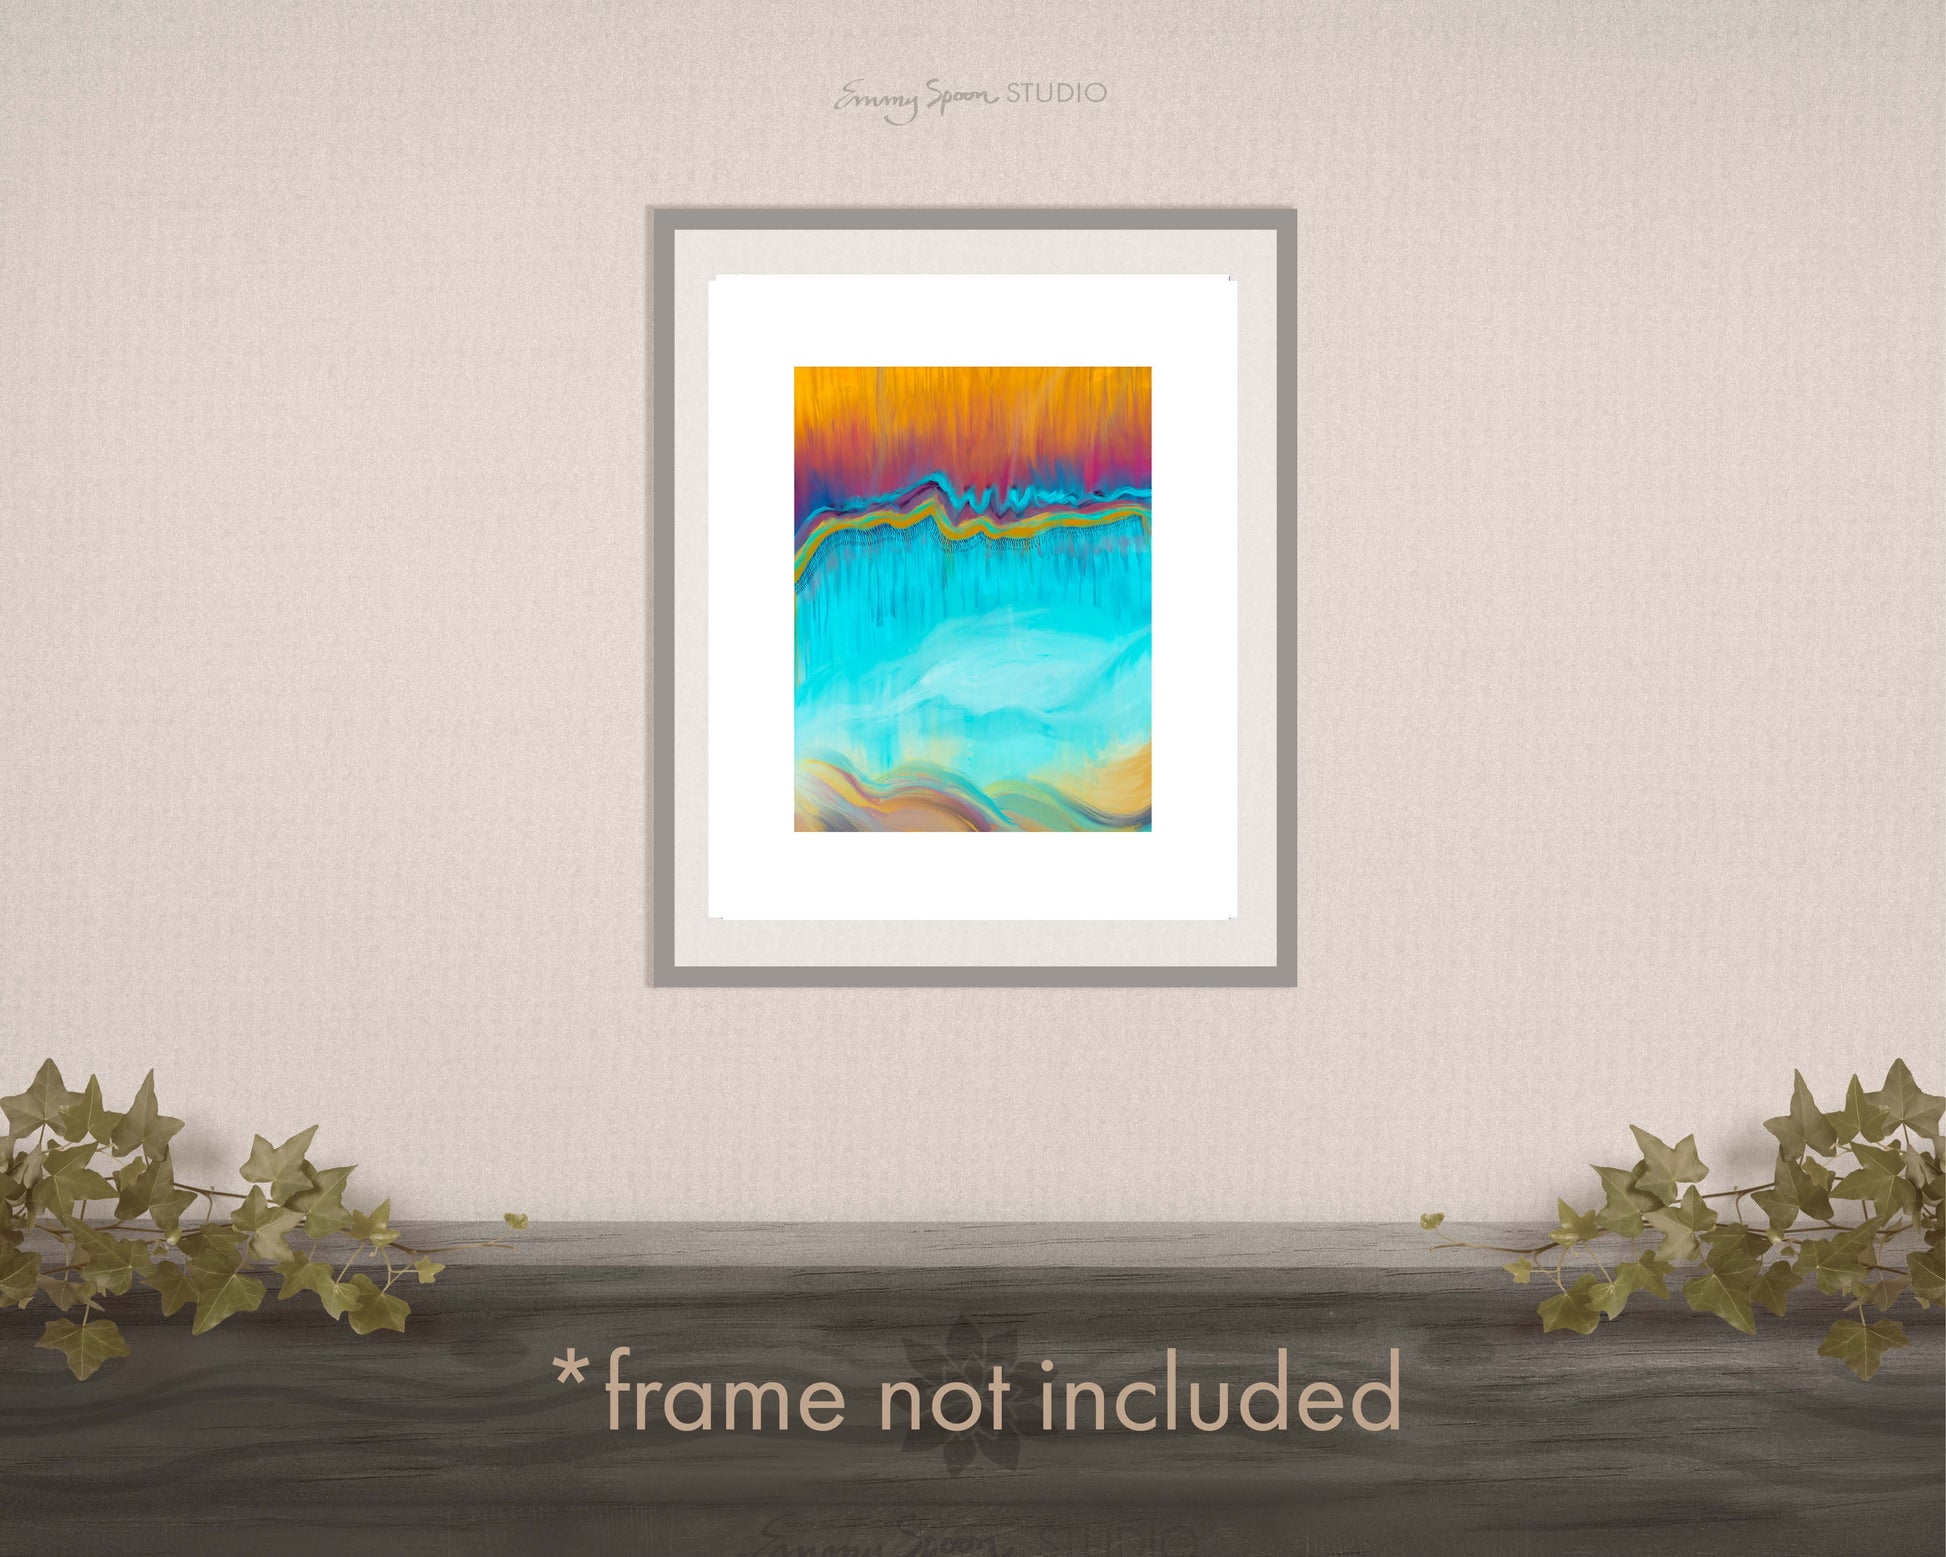 Waterfall Lustre Art Print by Emmy Spoon Studio. Frame not included